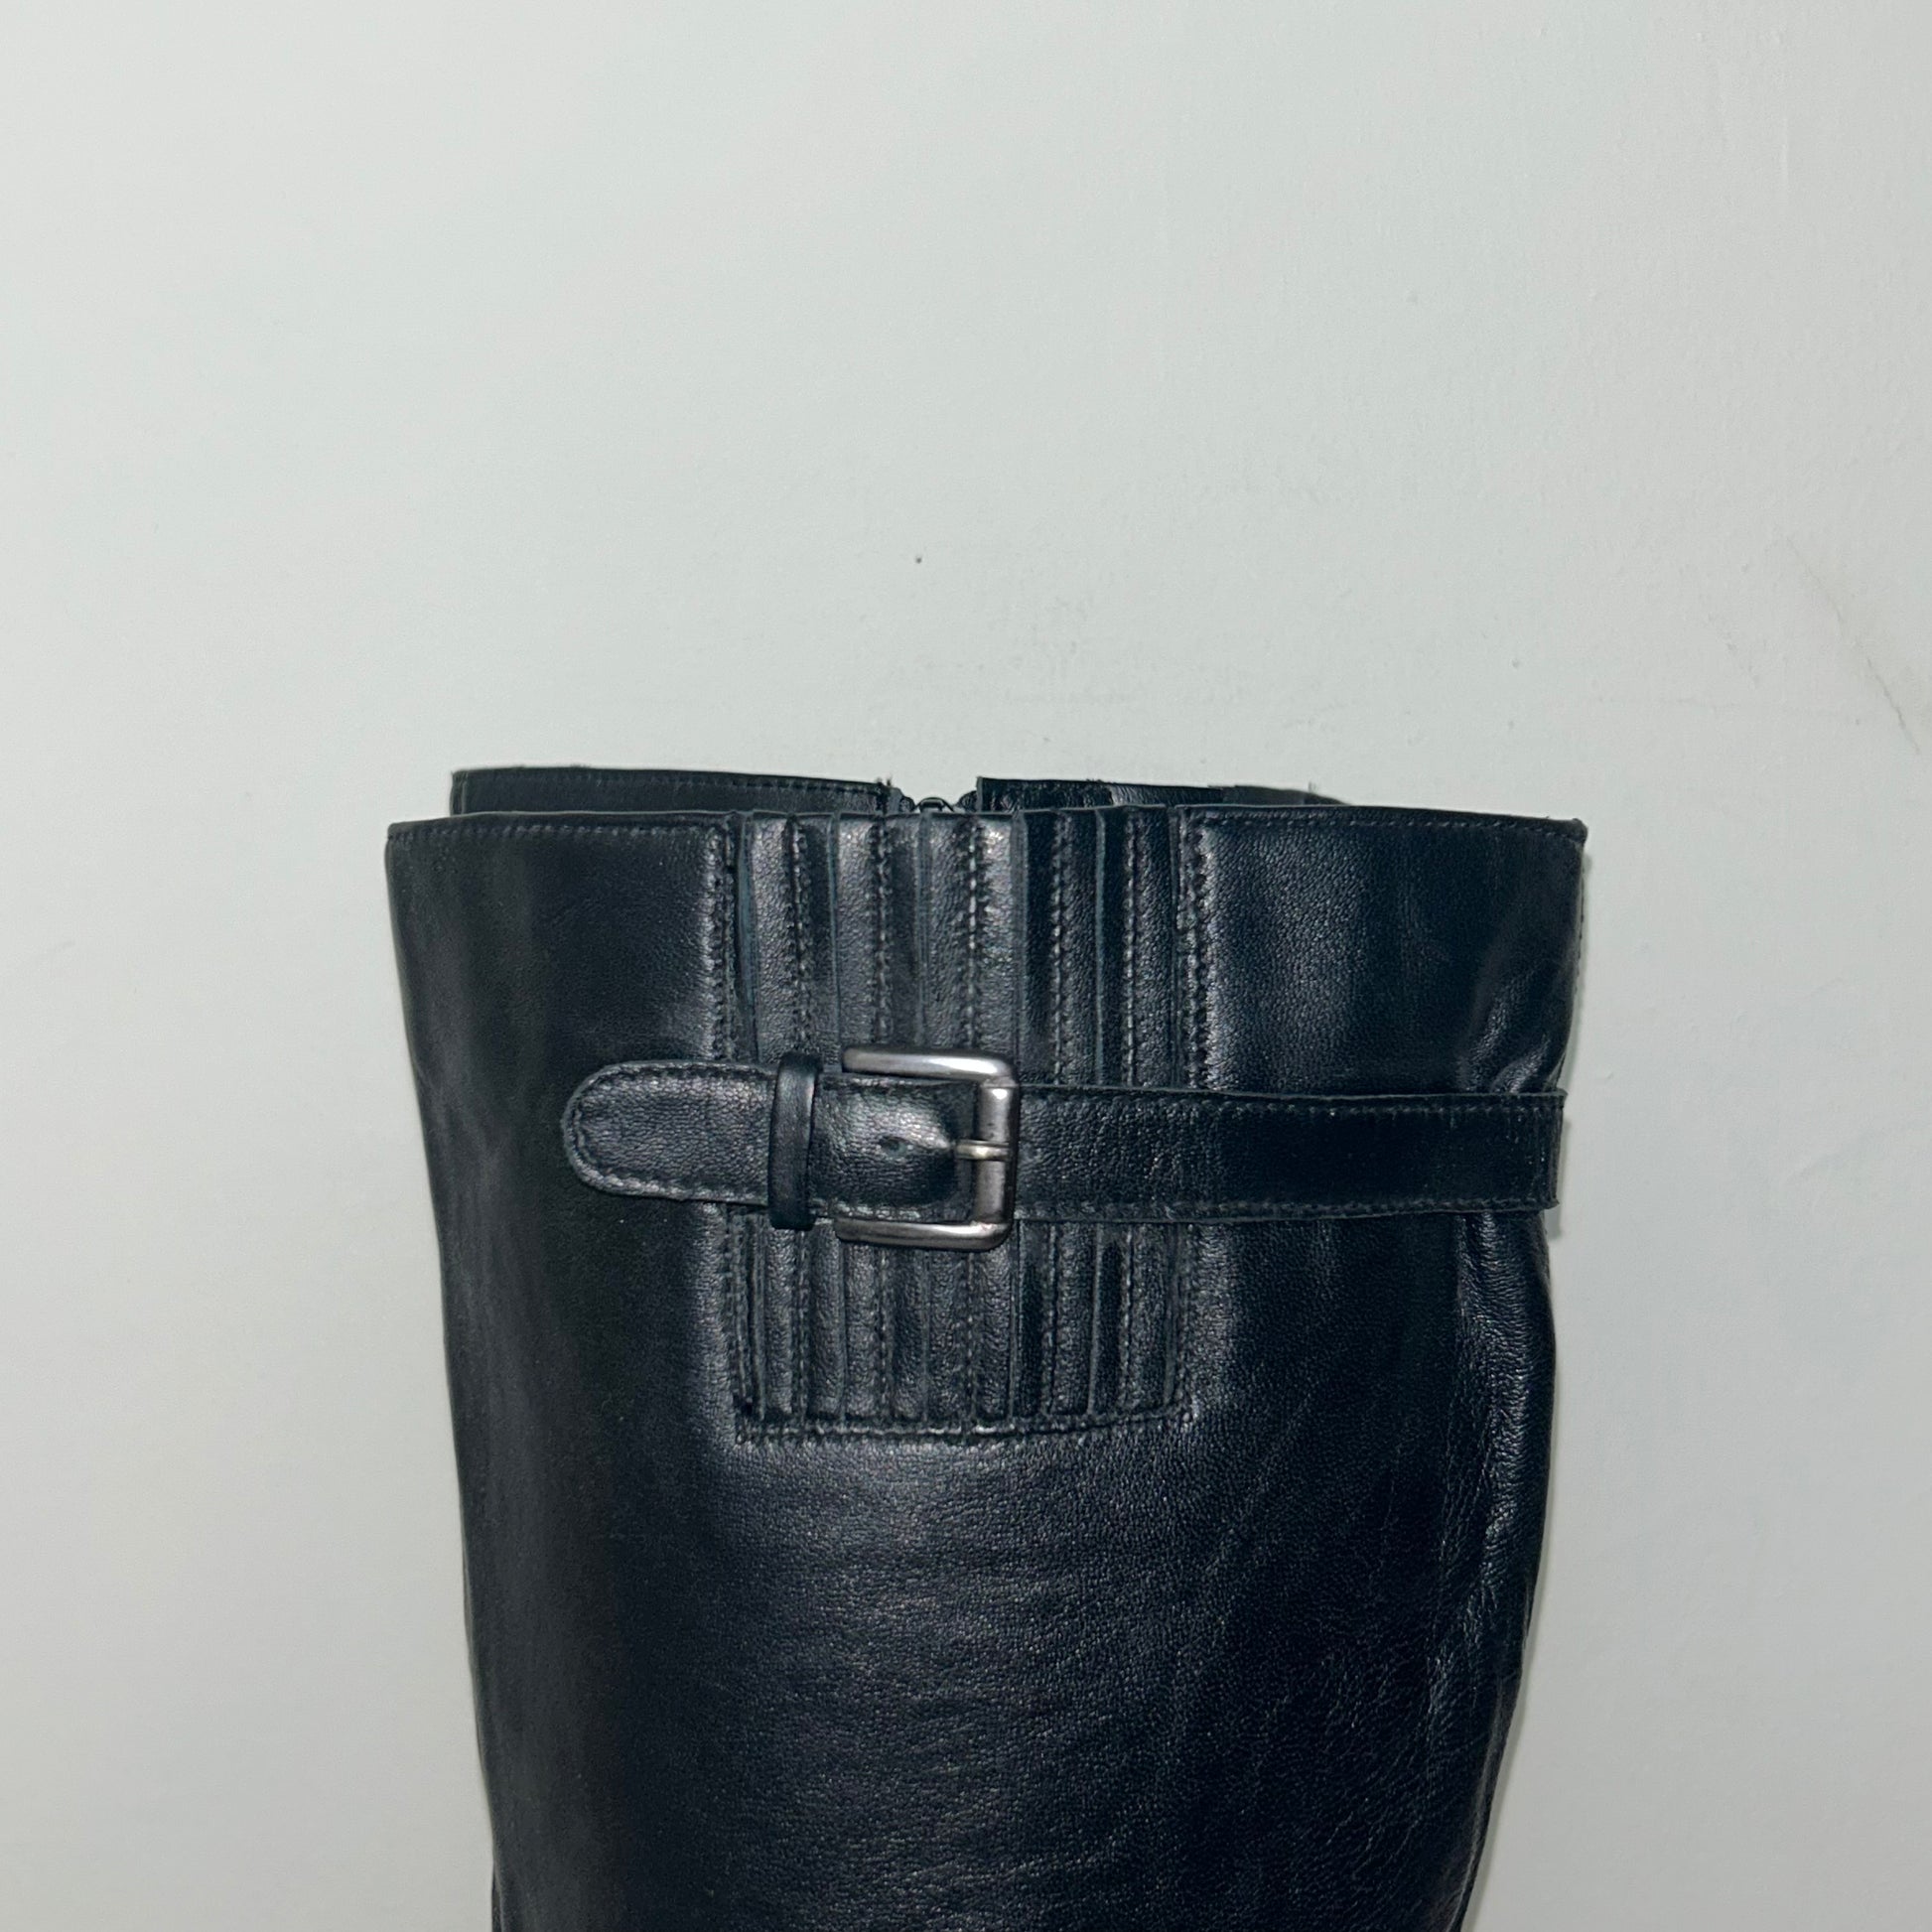 buckle of black knee high buckle boots shown on a white background